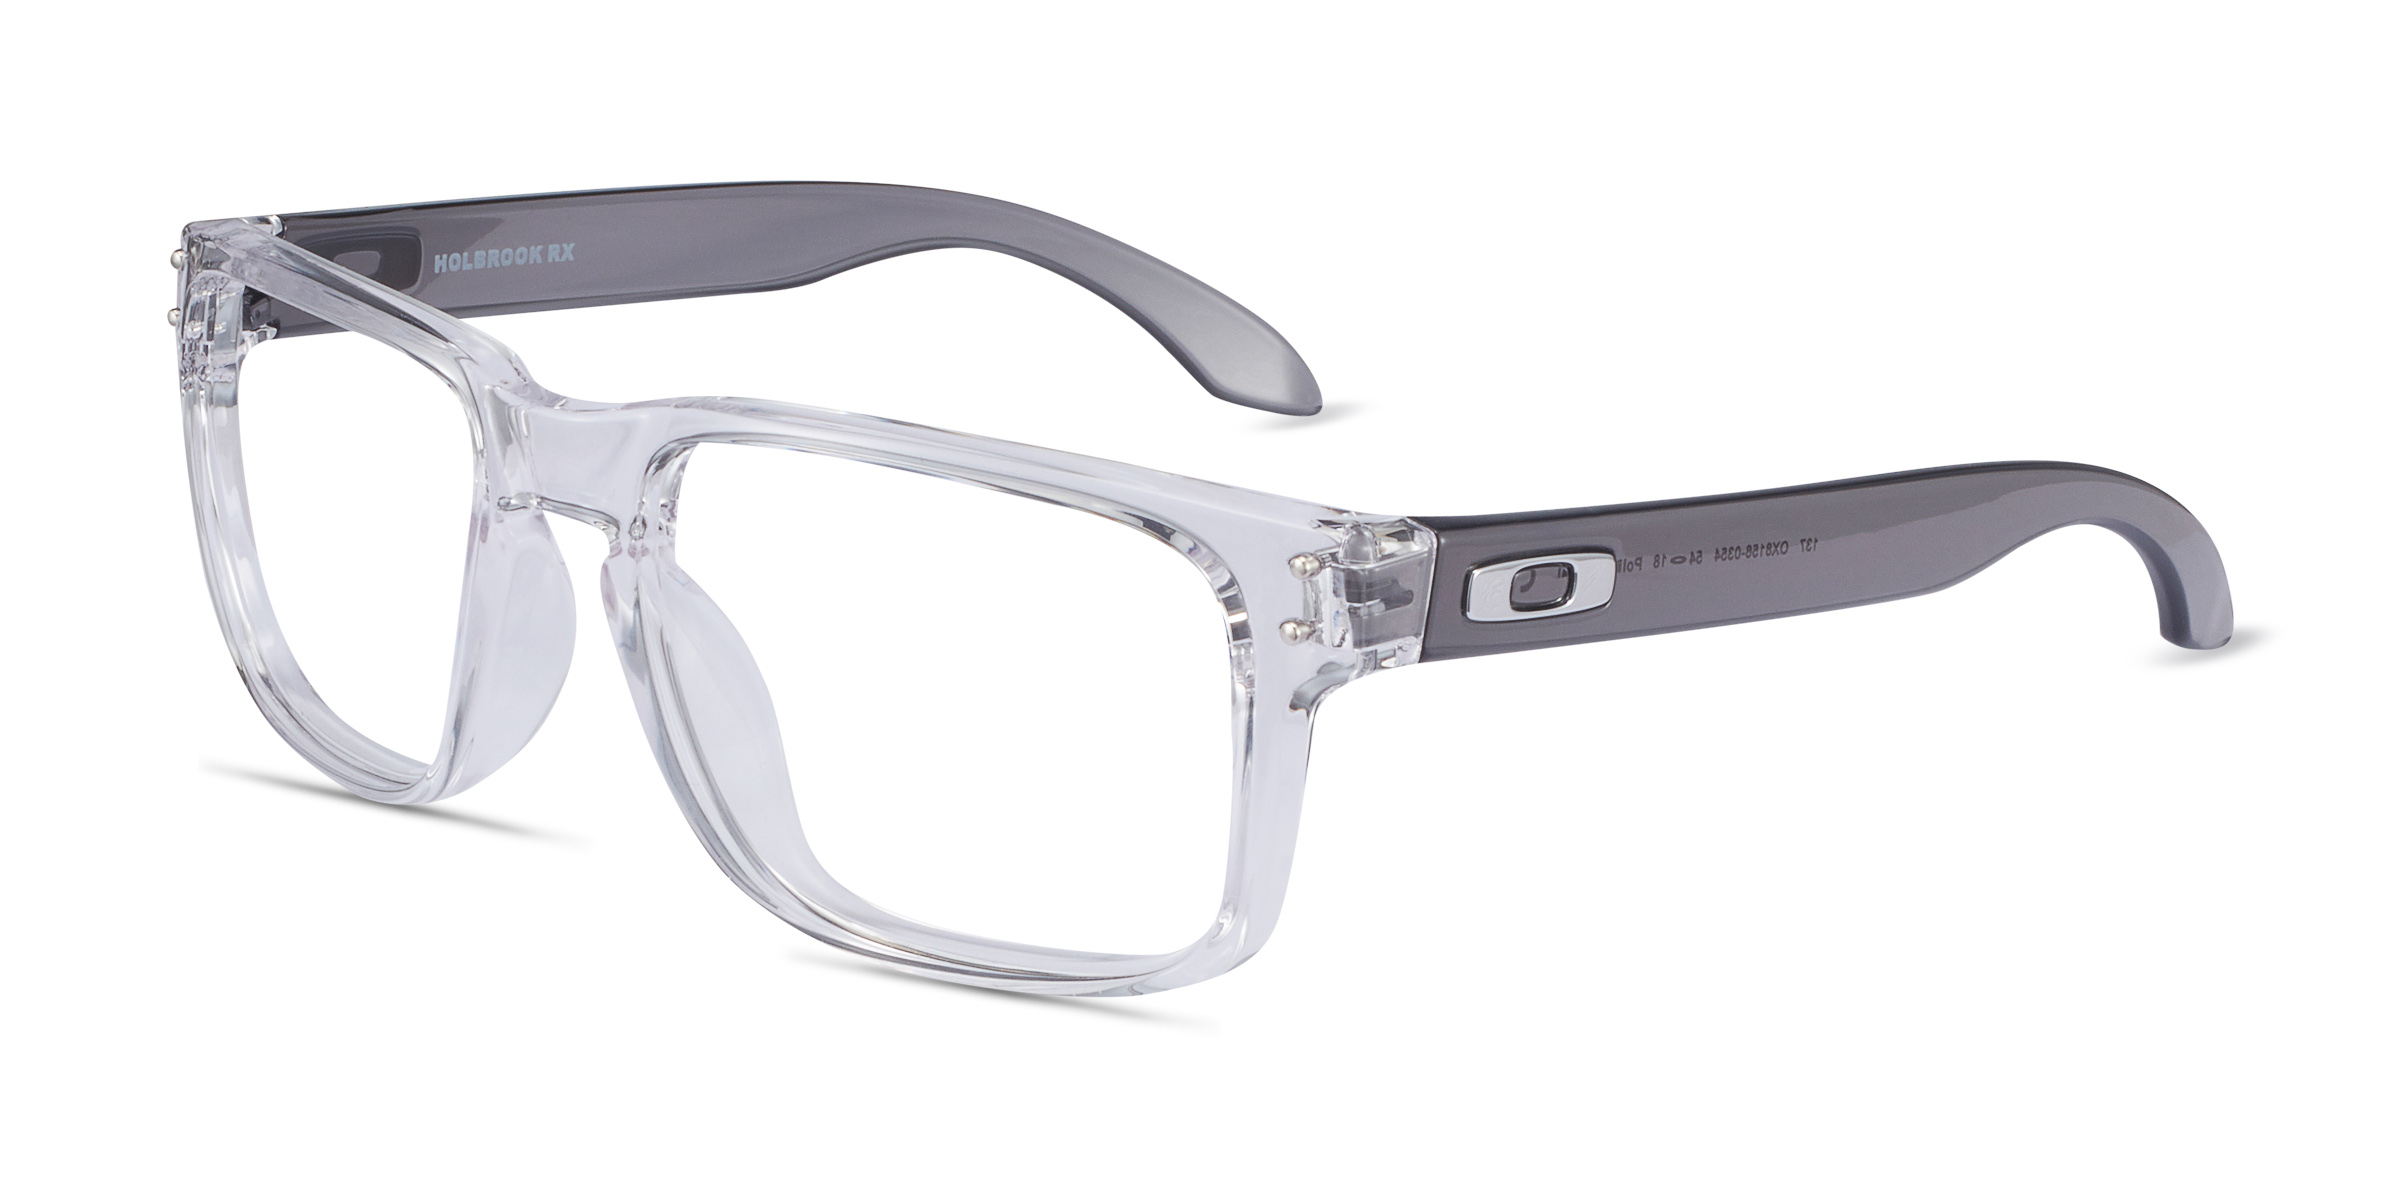 Oakley Holbrook Rx Rectangle Polished Clear And Gray Frame Glasses For Men Eyebuydirect